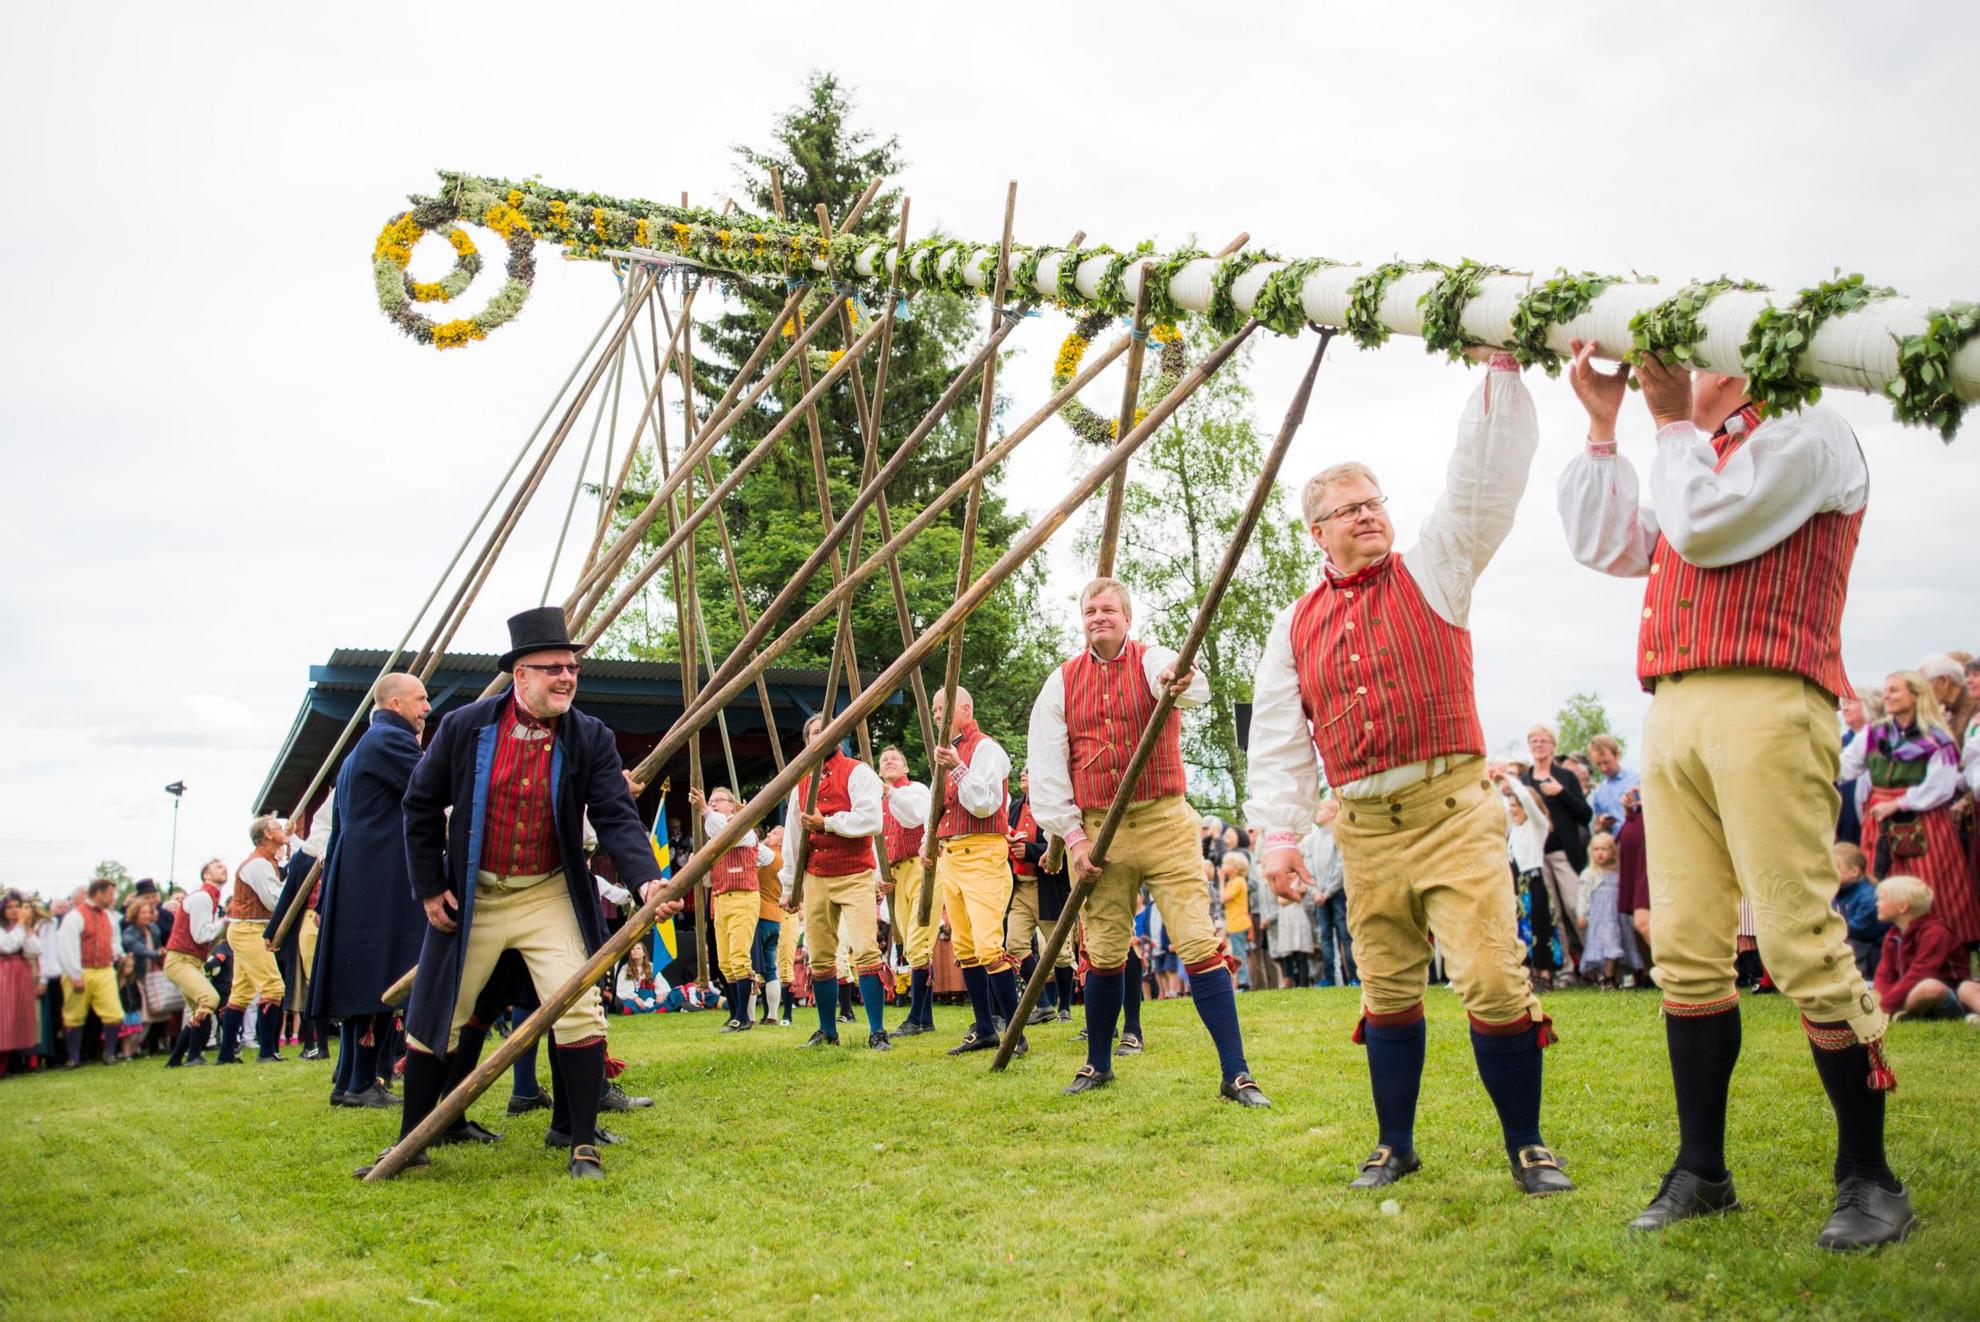 On a field, men wearing traditional folk costumes are raising a midsummer pole.